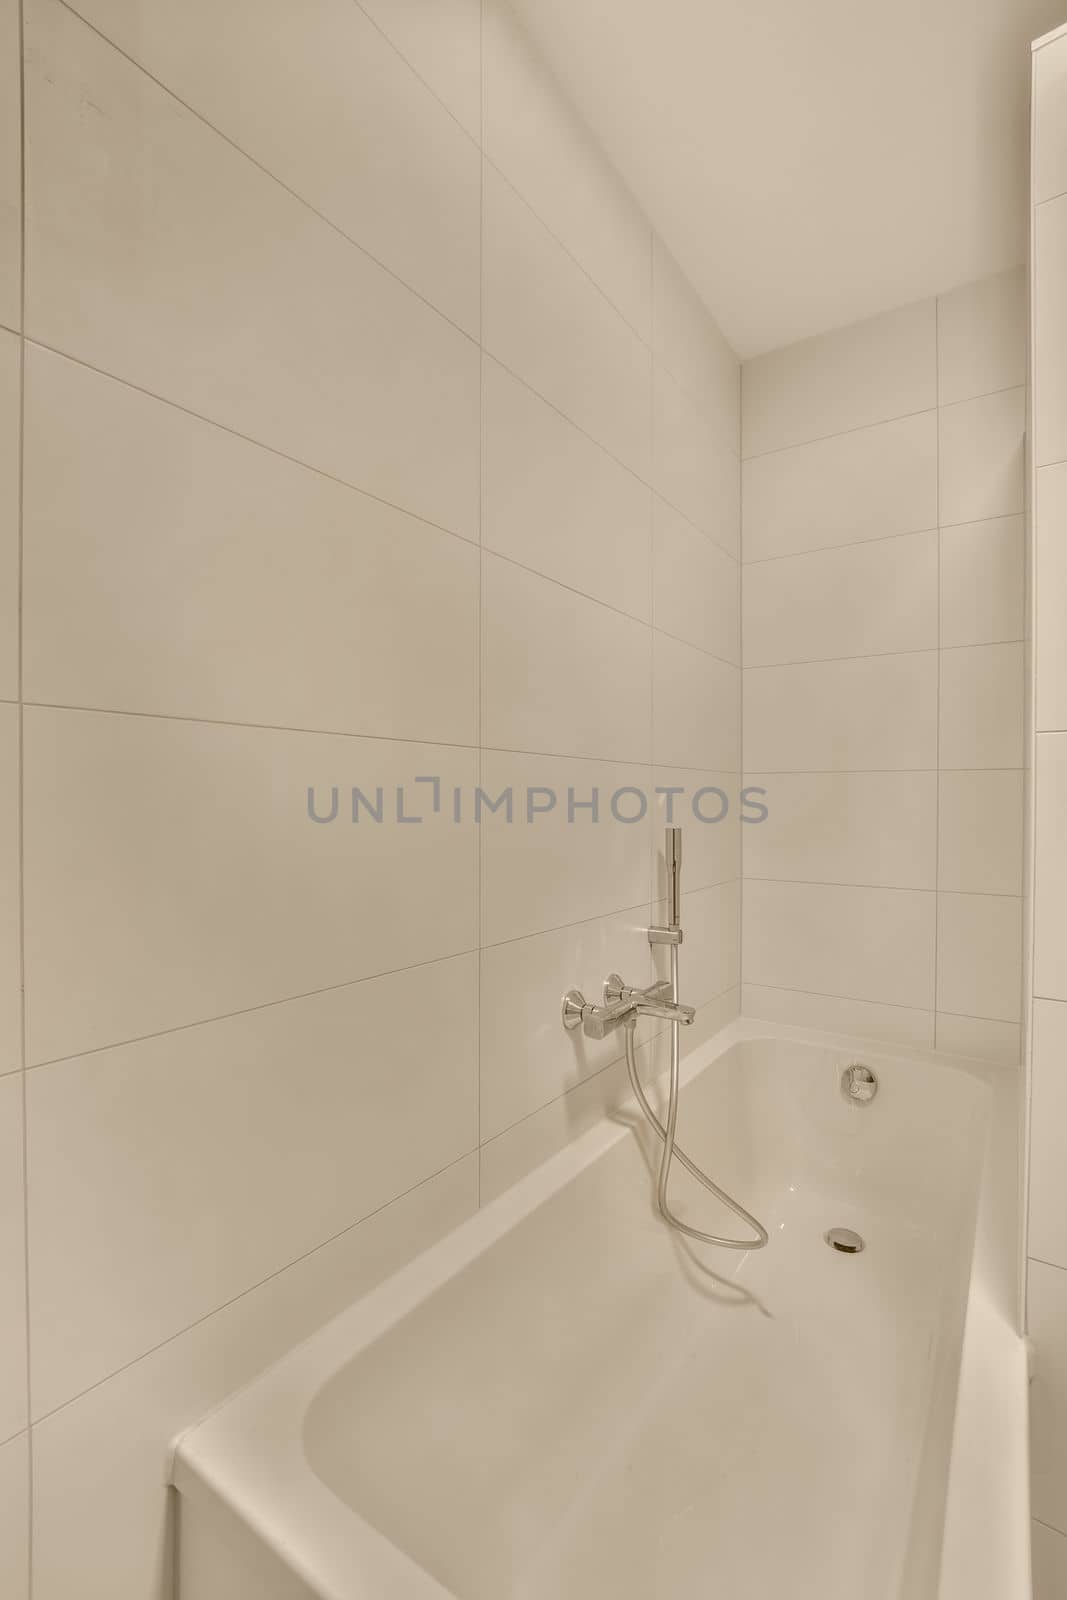 a bathroom with white tiles on the walls, and a shower head in the corner of the bathtub is attached to the wall